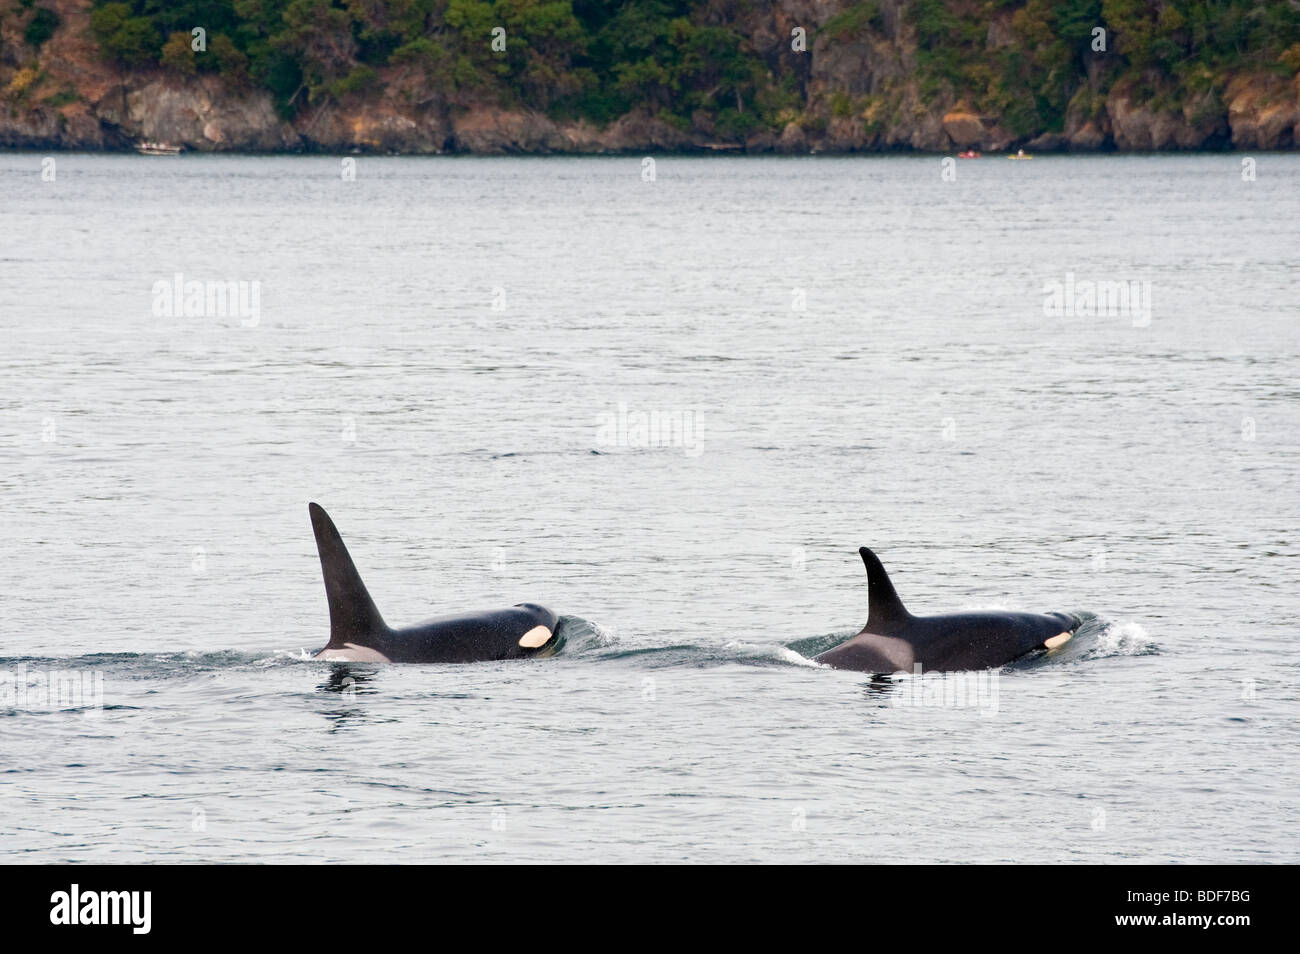 A pair of Orca Whales surface off the west coast of Lopez Island in the San Juan Islands of Washington State, USA. Stock Photo